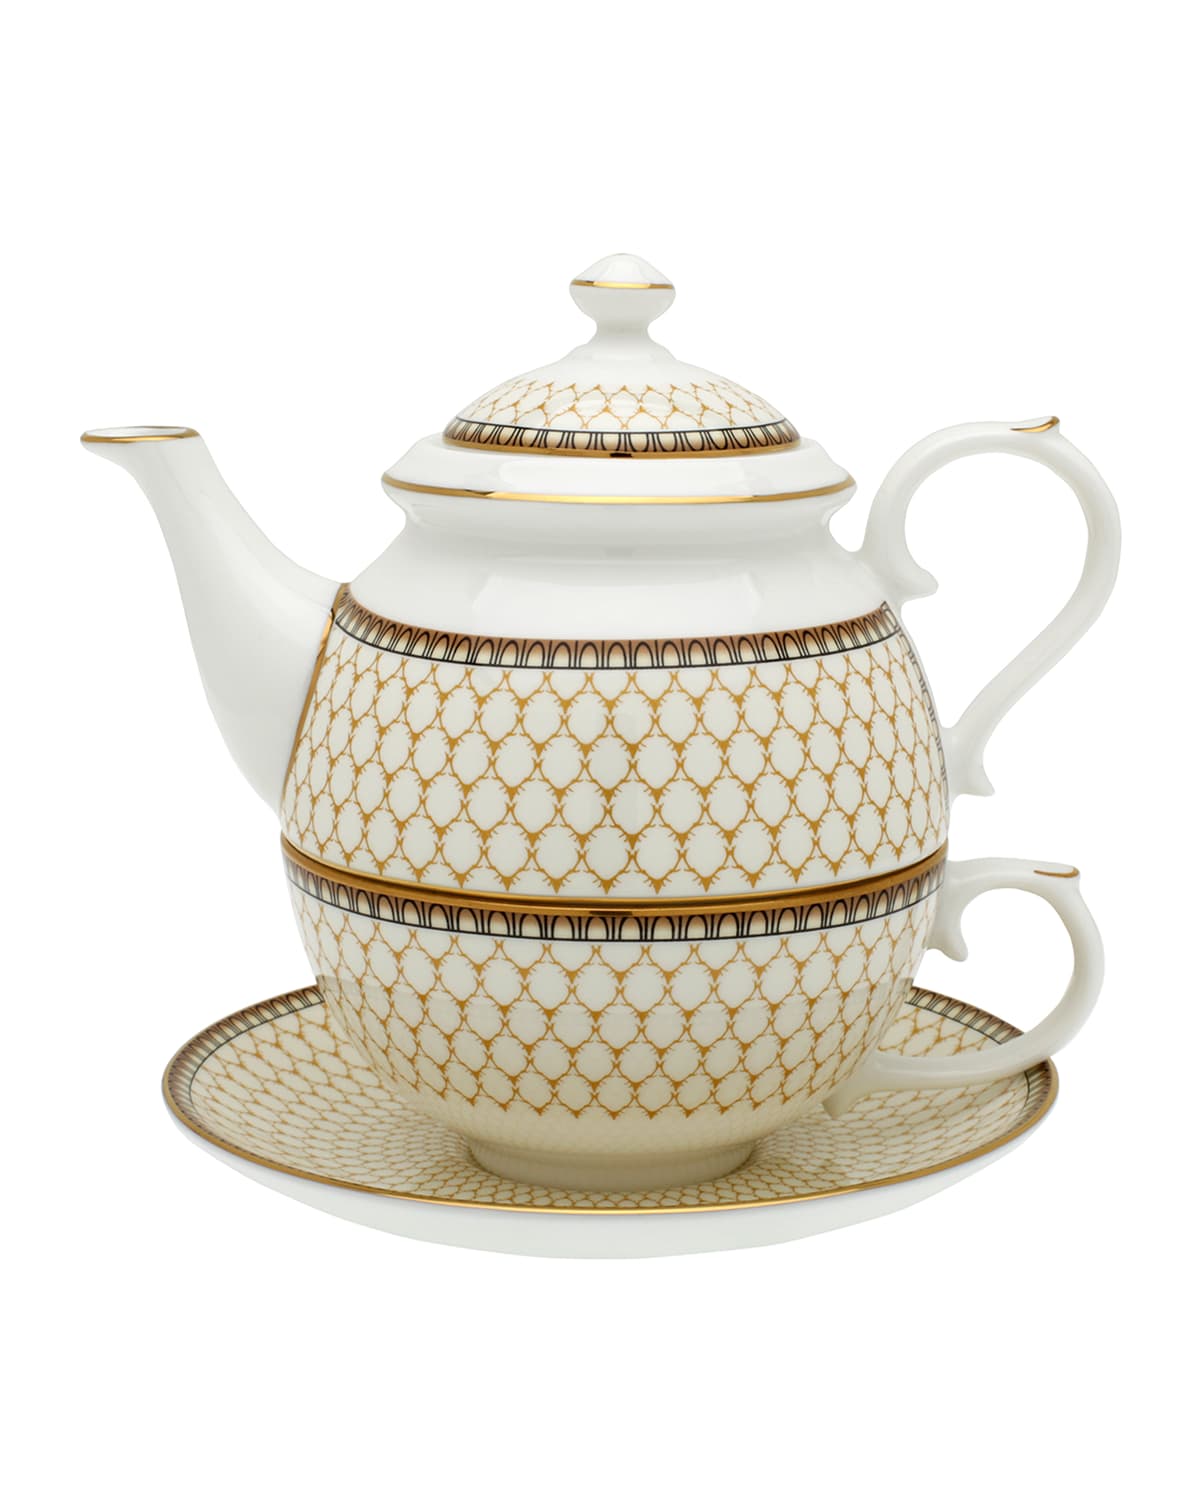 Halcyon Days Antler Trellis Tea For One Set In Ivory